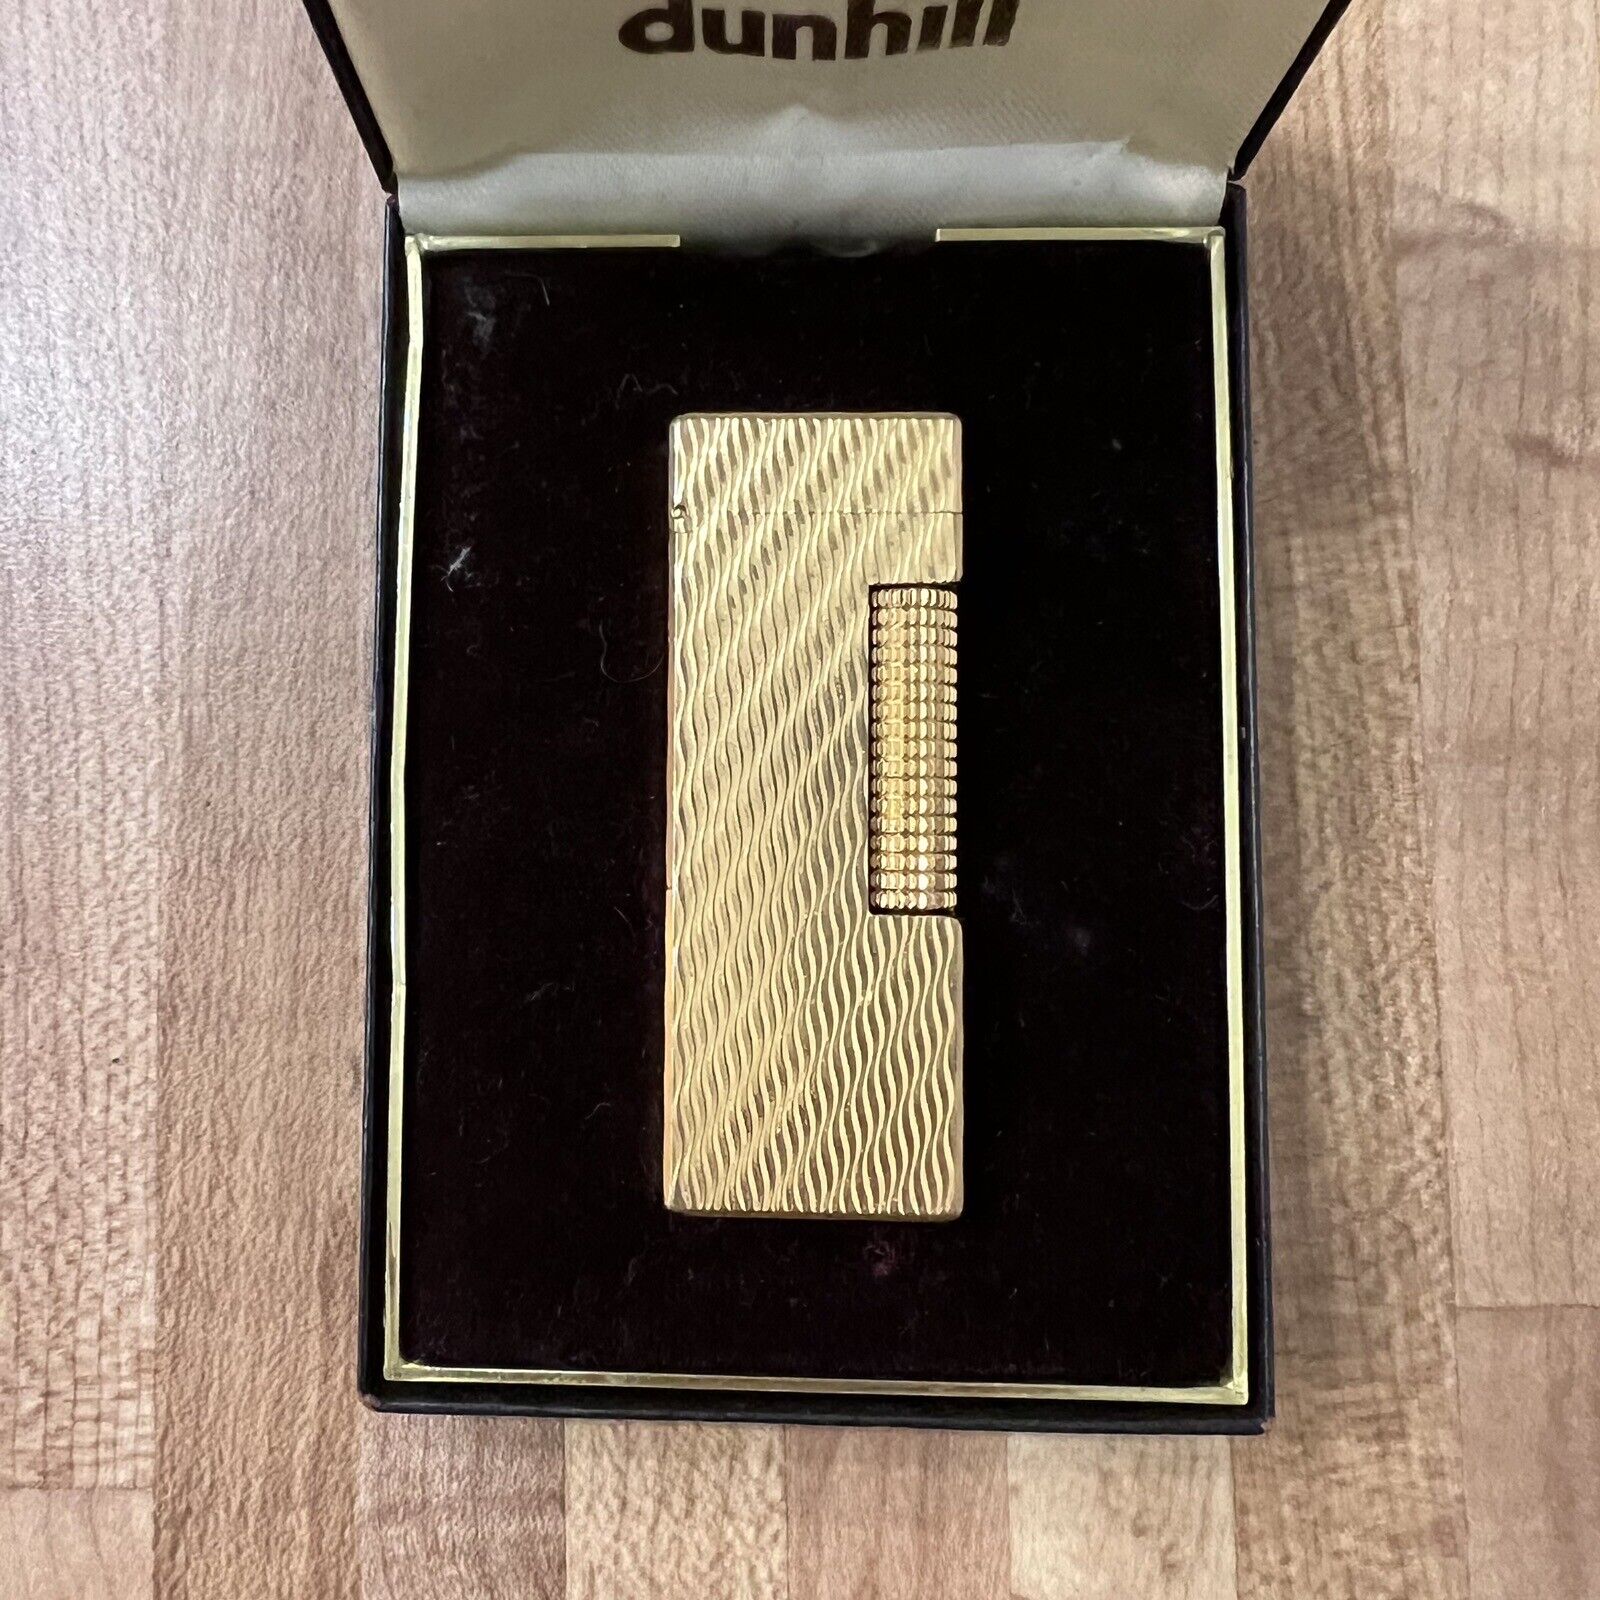 All Original Vintage Alfred Dunhill Rollagas Lighter Gold Plated “Waves” Pattern